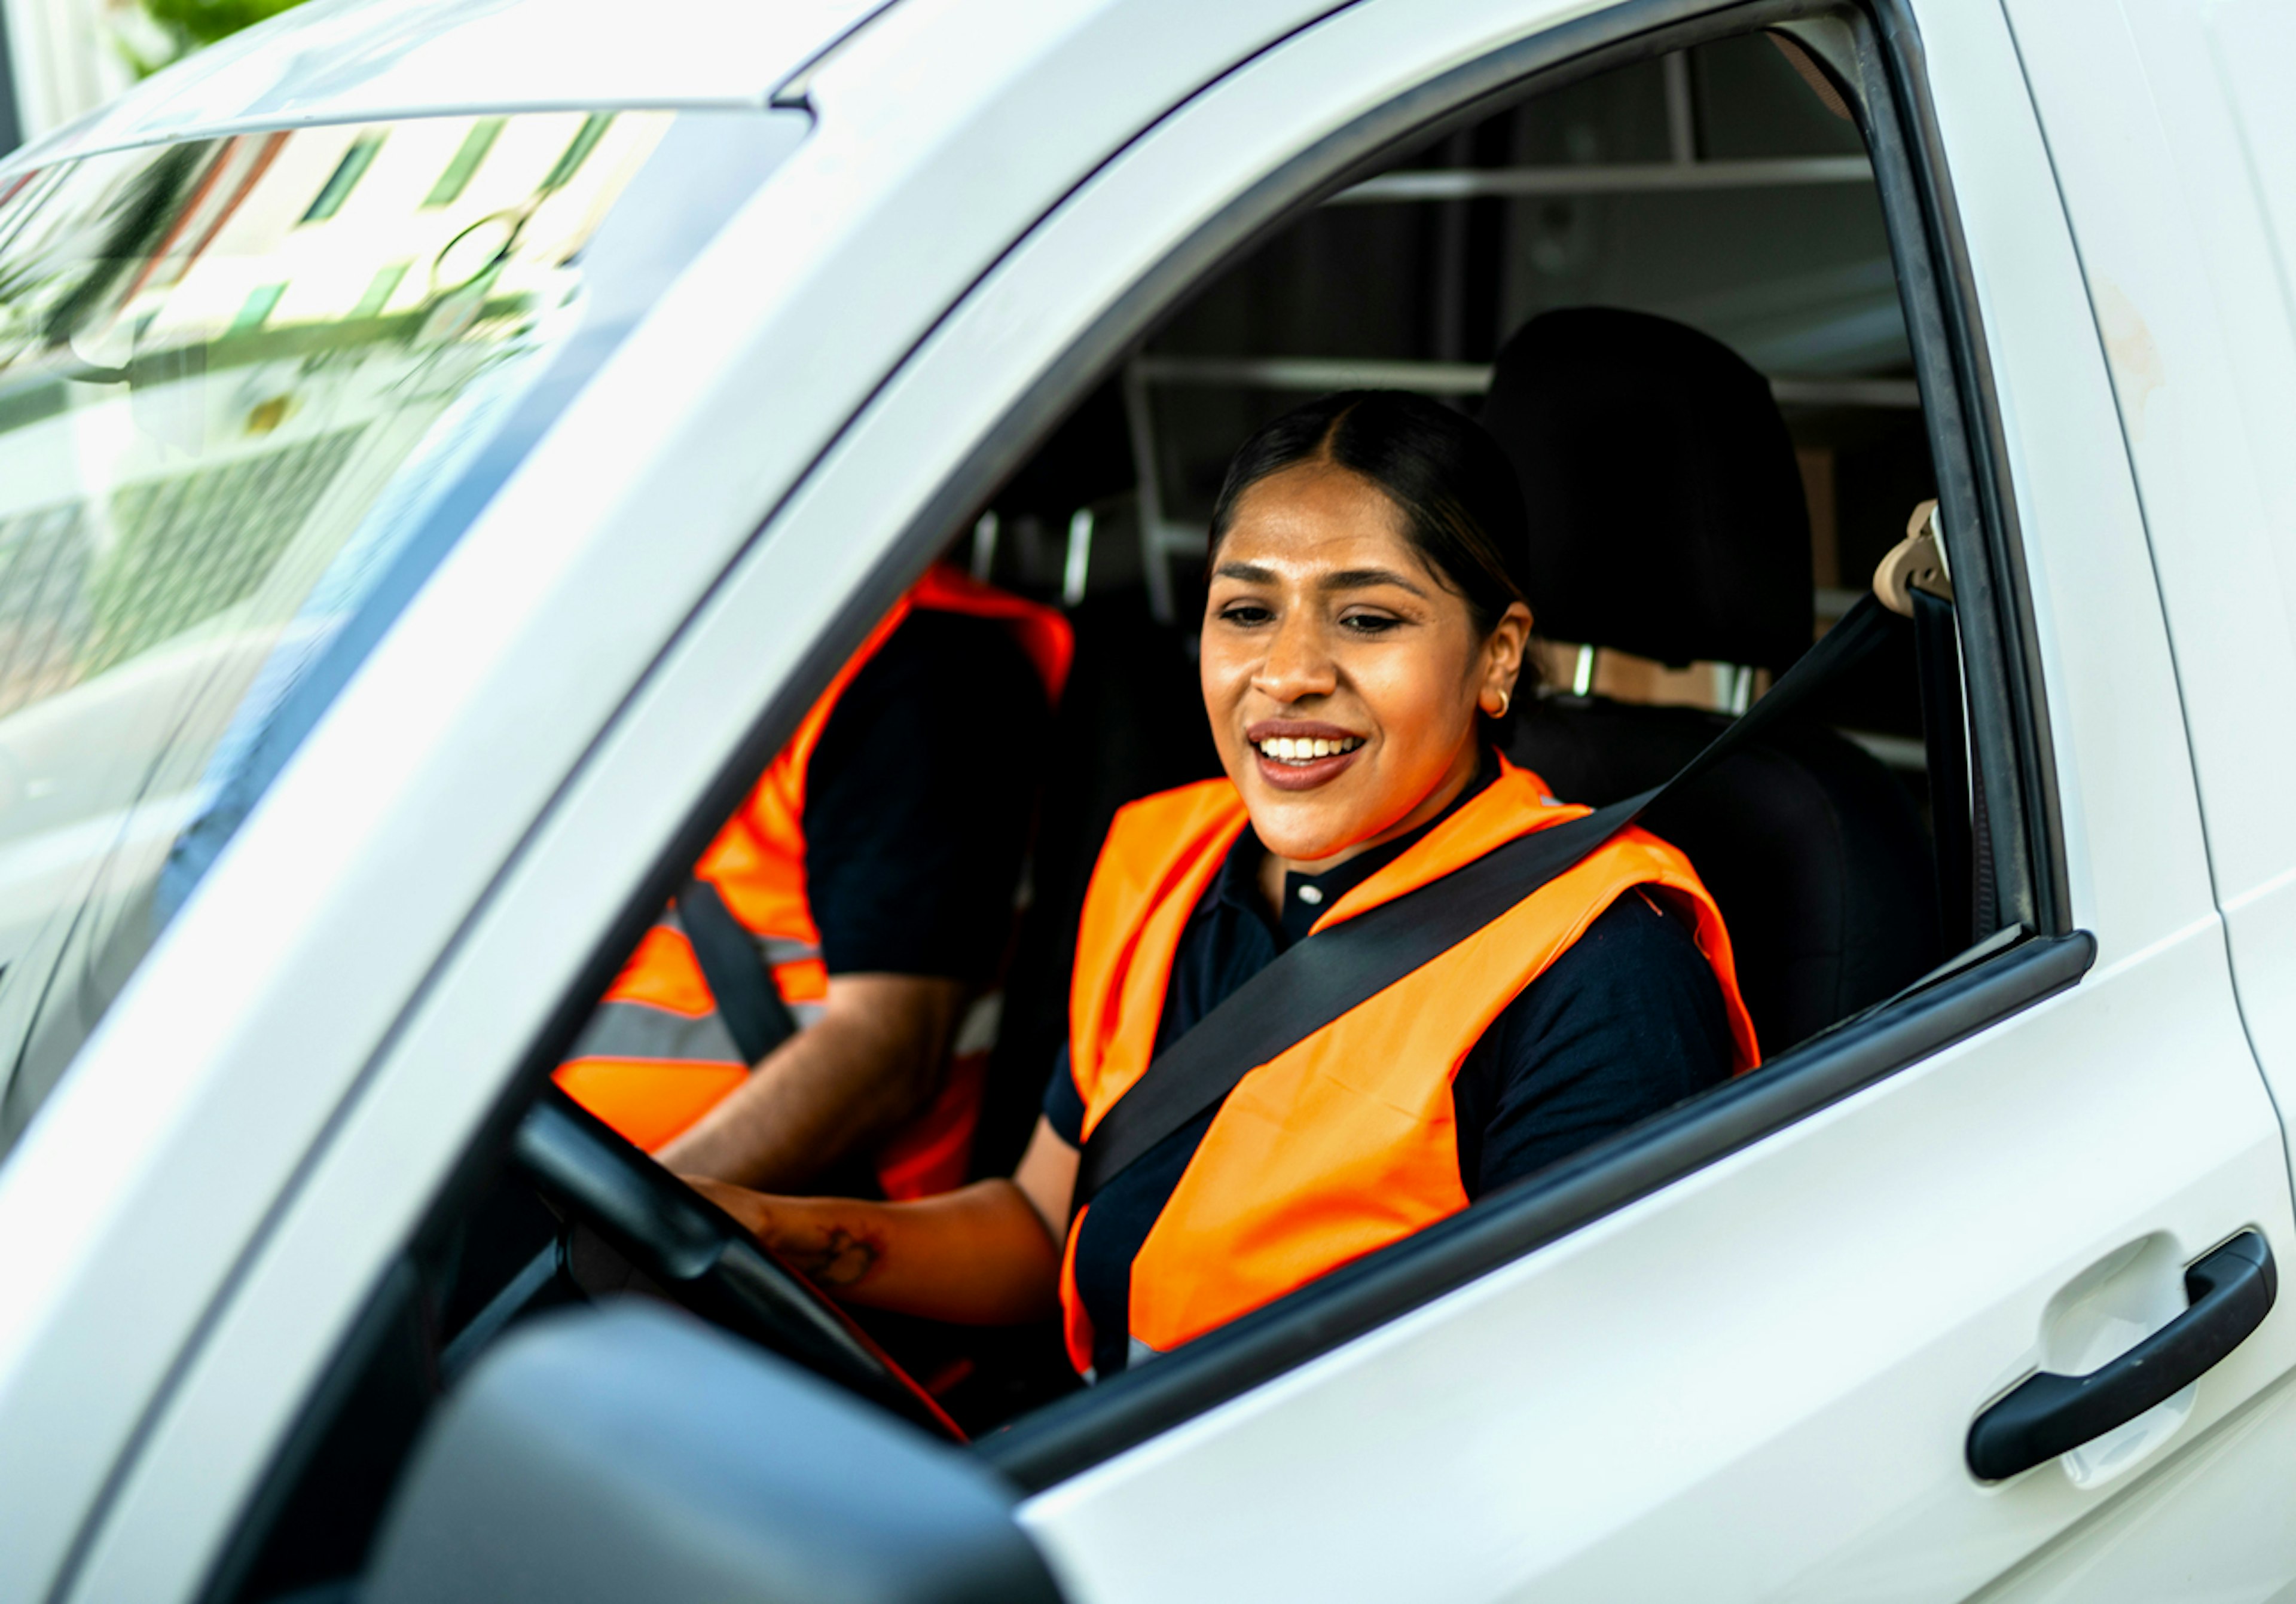 Female fleet driver with safety vest.